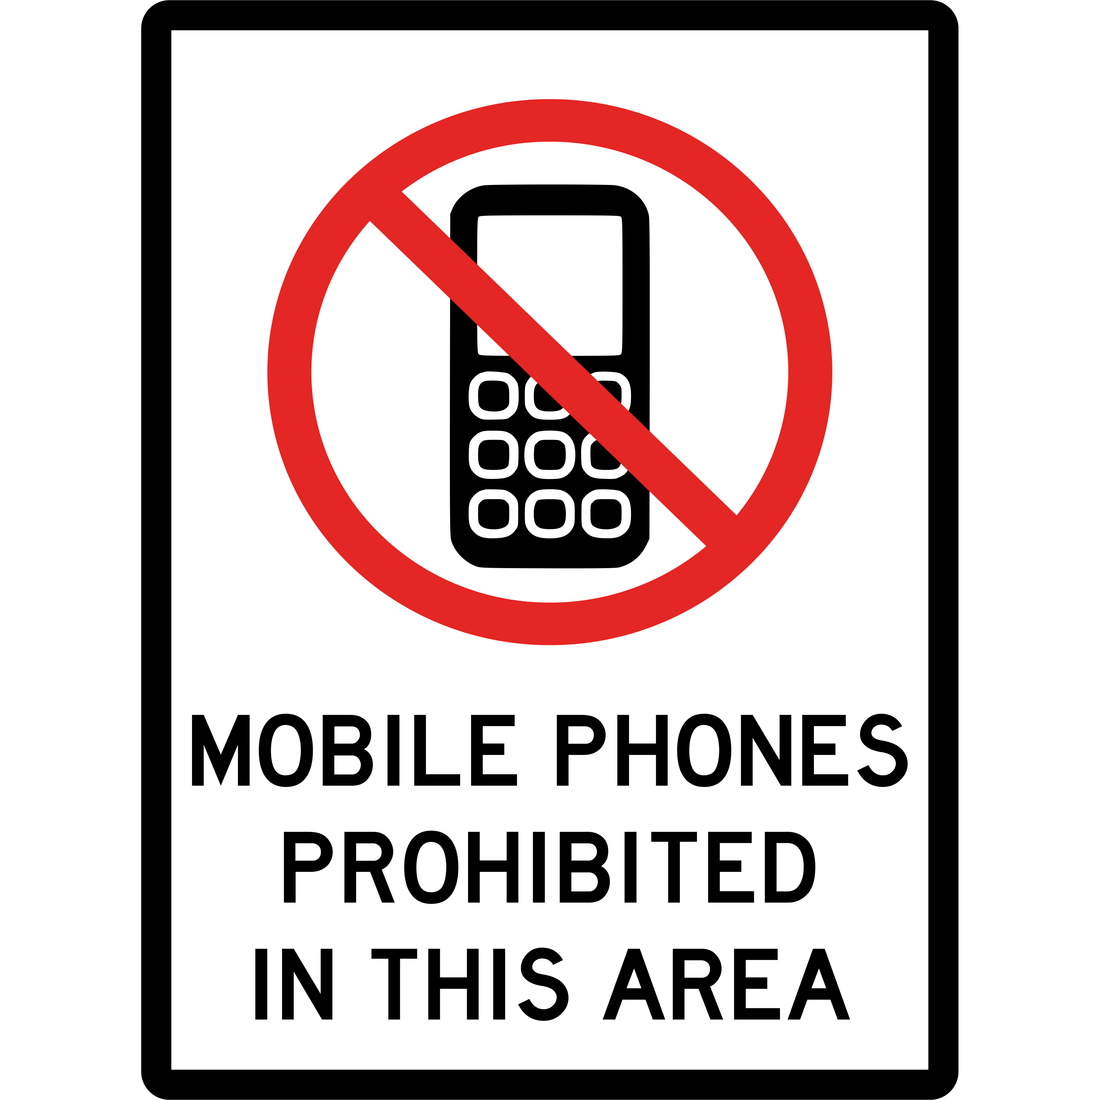 PROHIBITION - MOBILE PHONES PROHIBITED IN THIS AREA